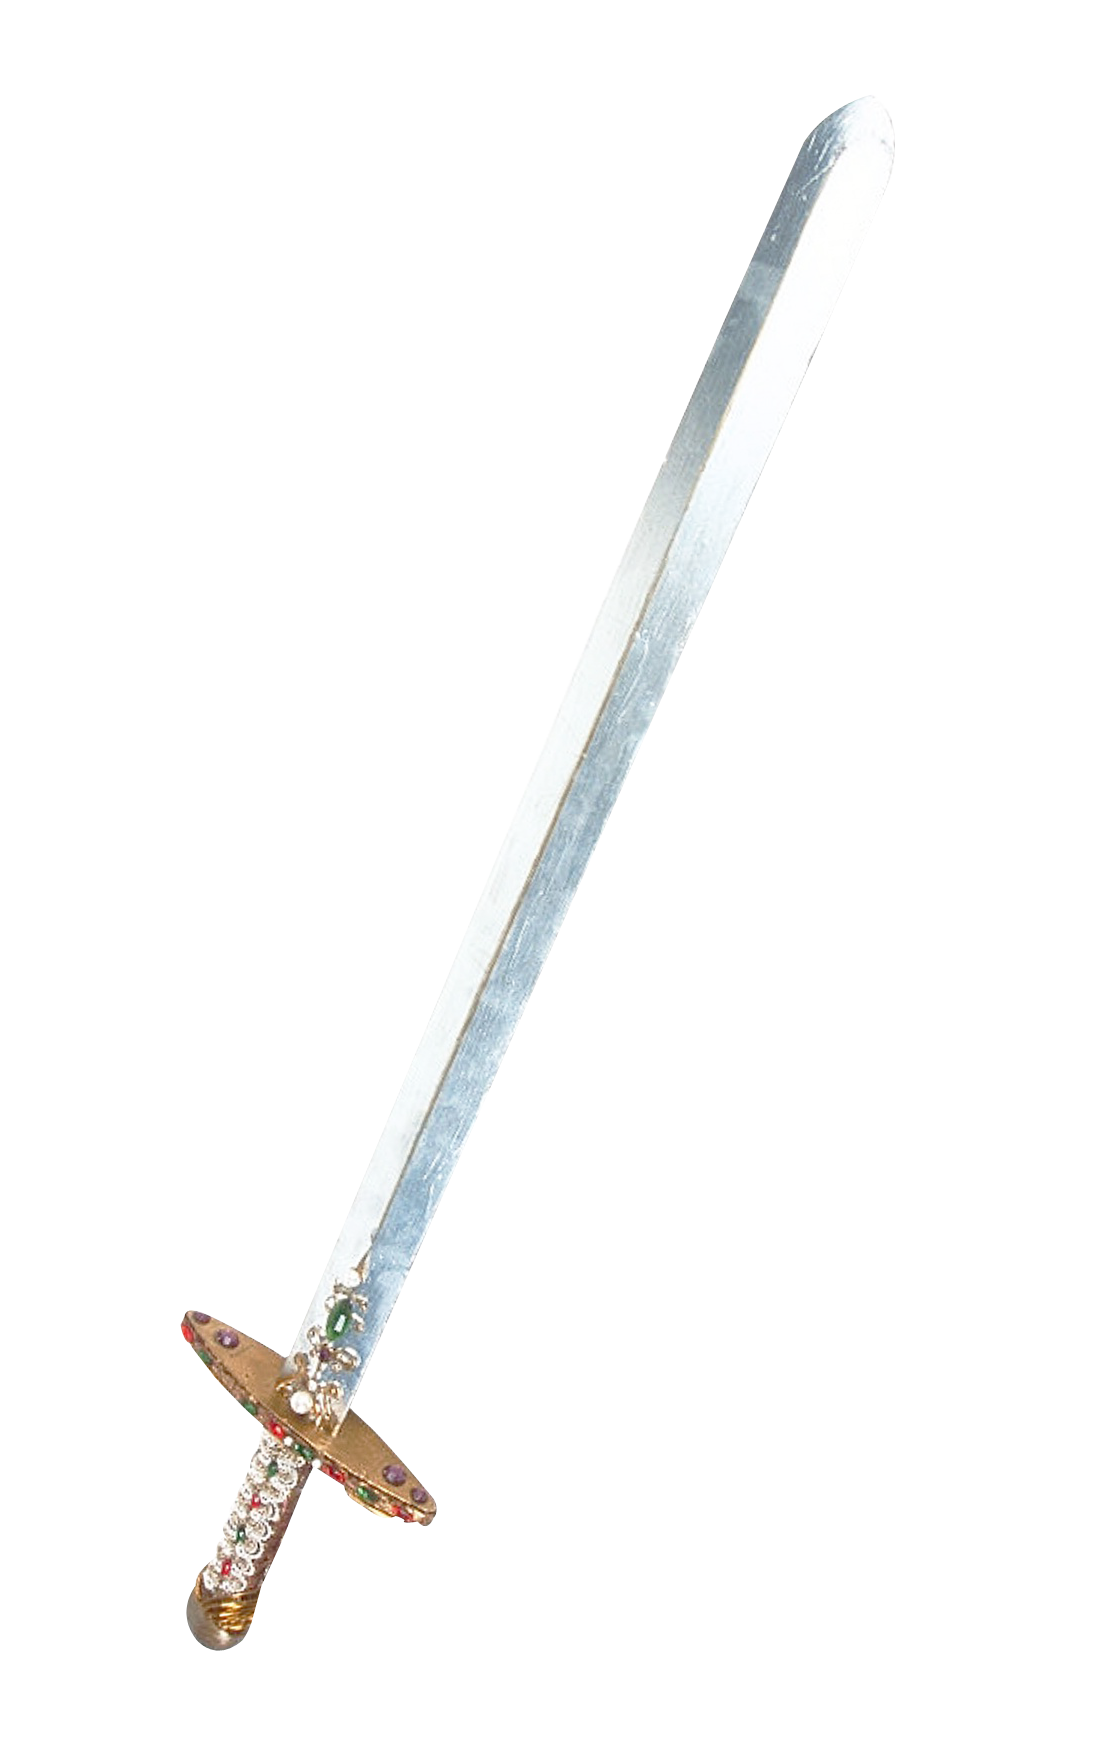 Ornate Medieval Sword Isolated